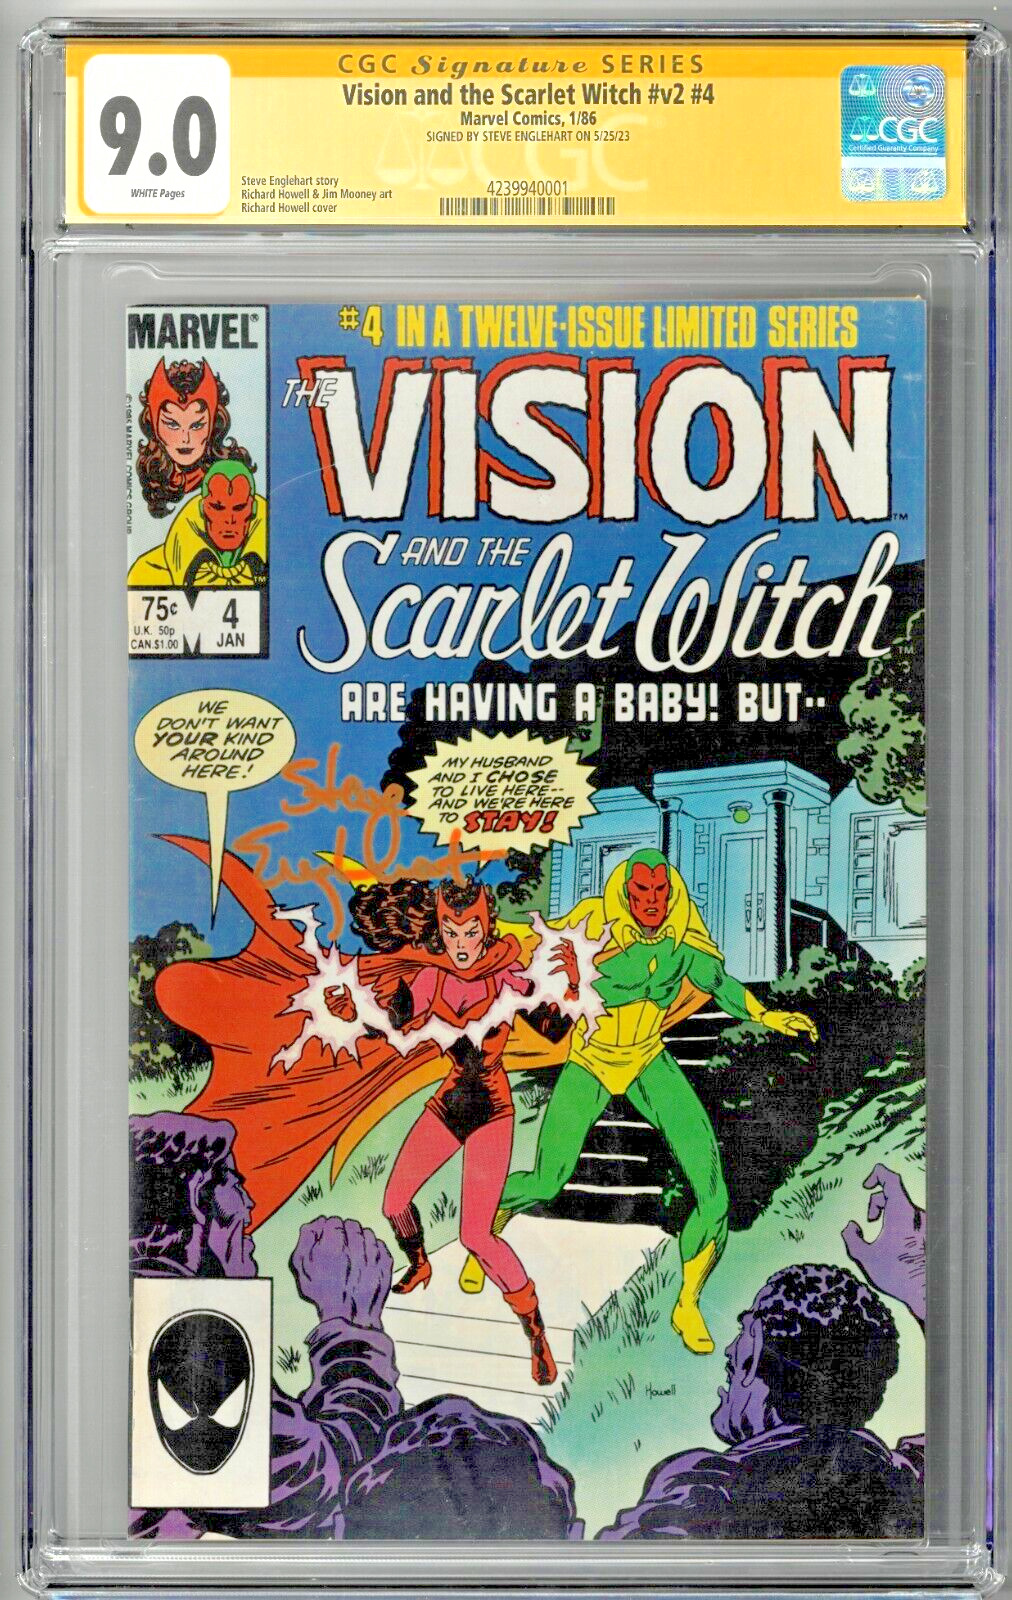 Vision and Scarlet Witch v2 #4 CGC SS 9.0 (1986, Marvel) Signed Steve Englehart